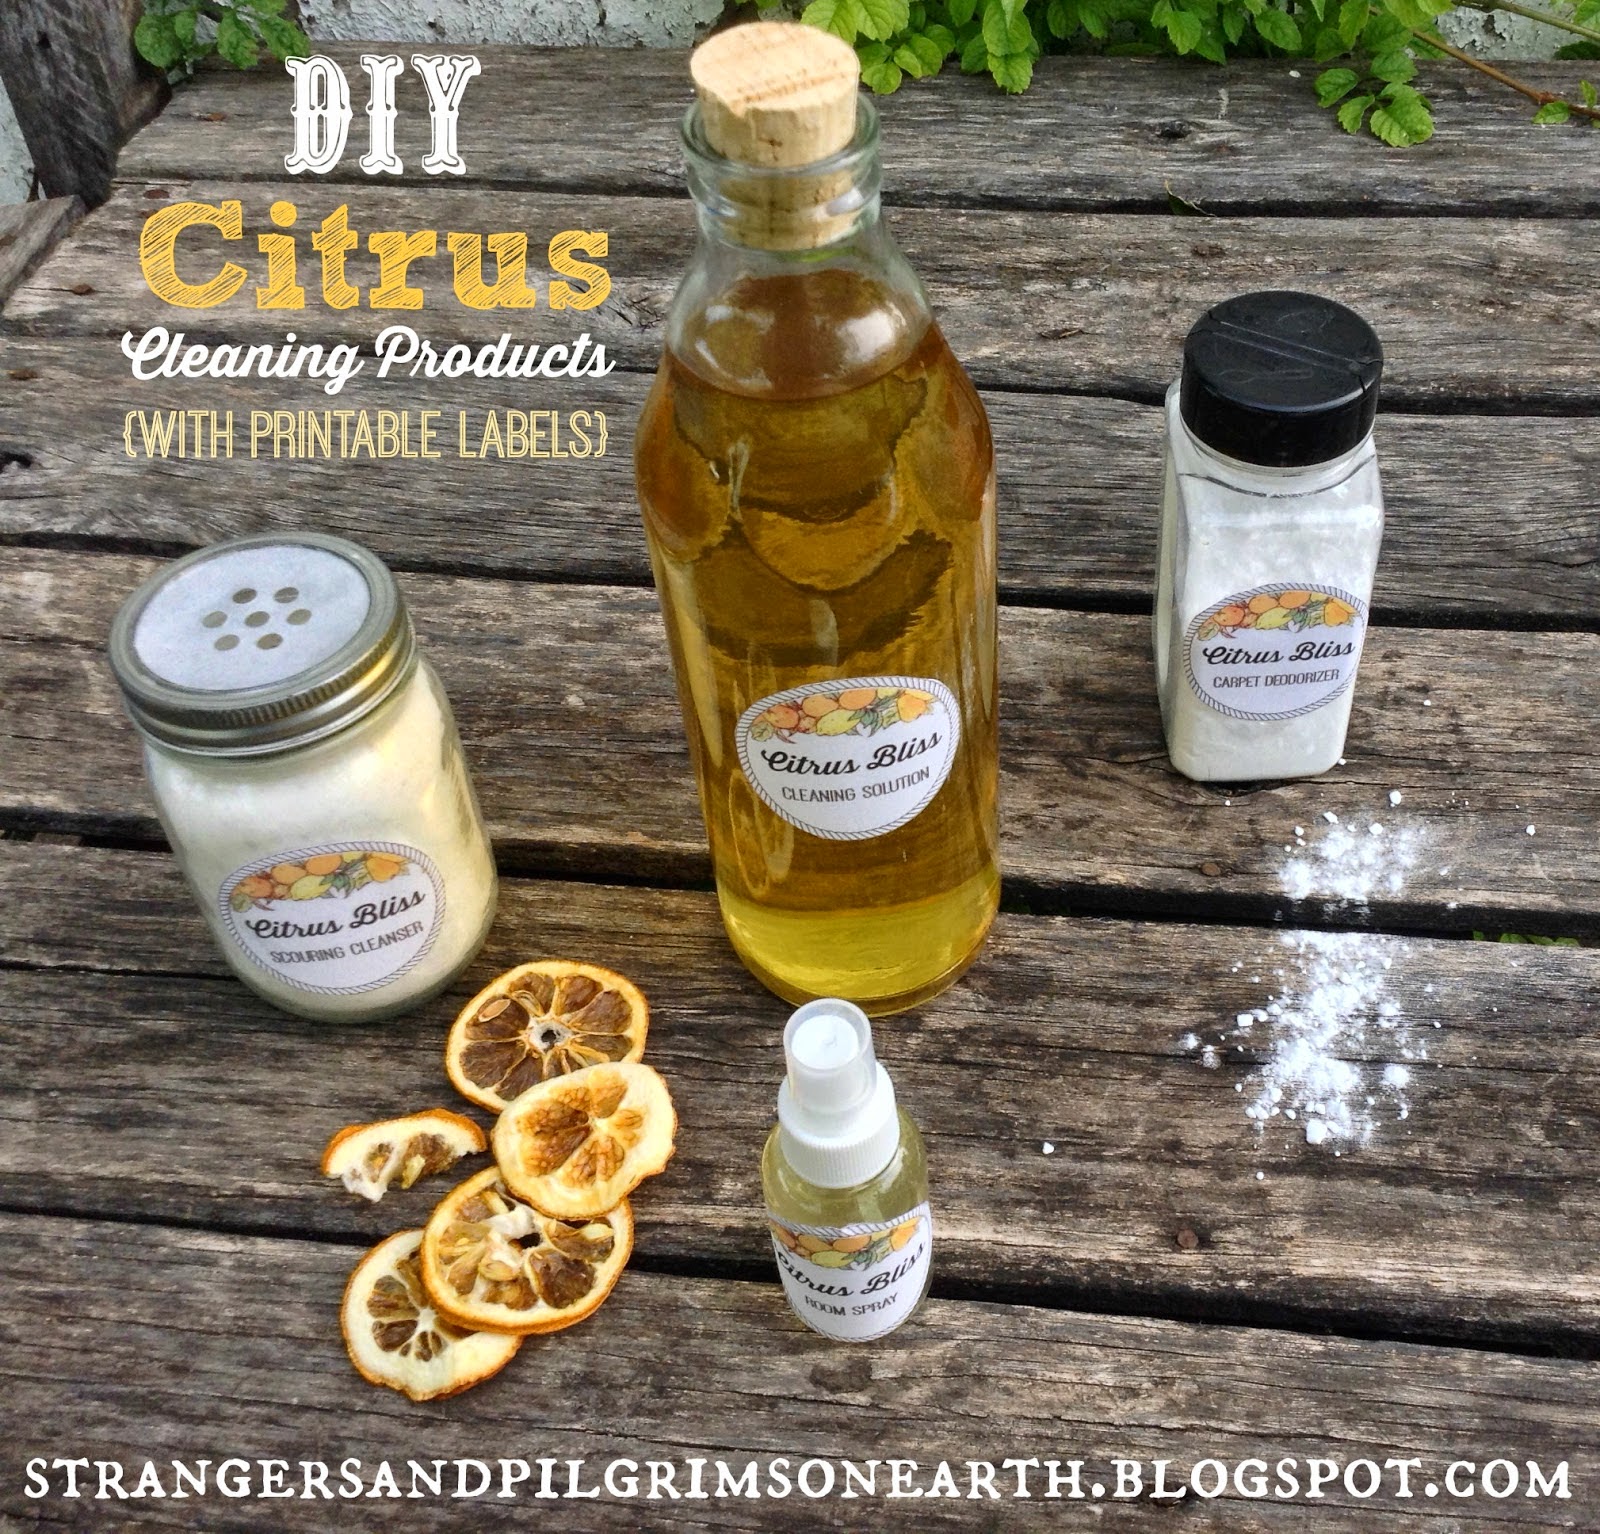 DIY Citrus Cleaning Products